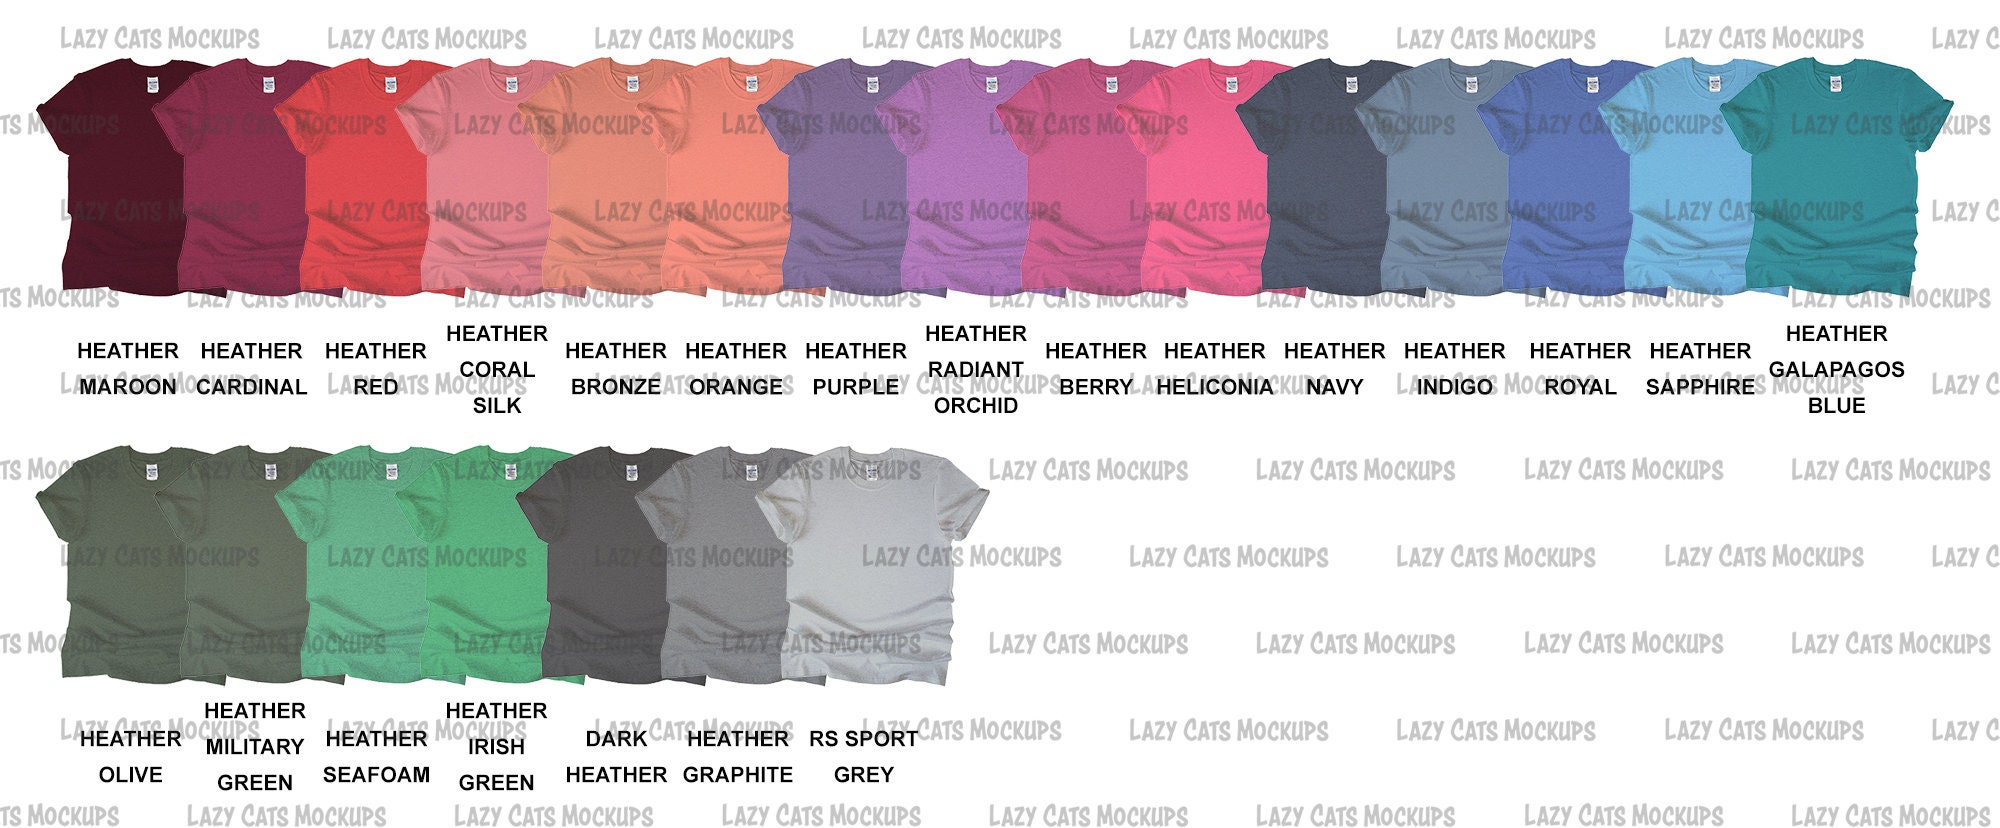 Heather Color Chart